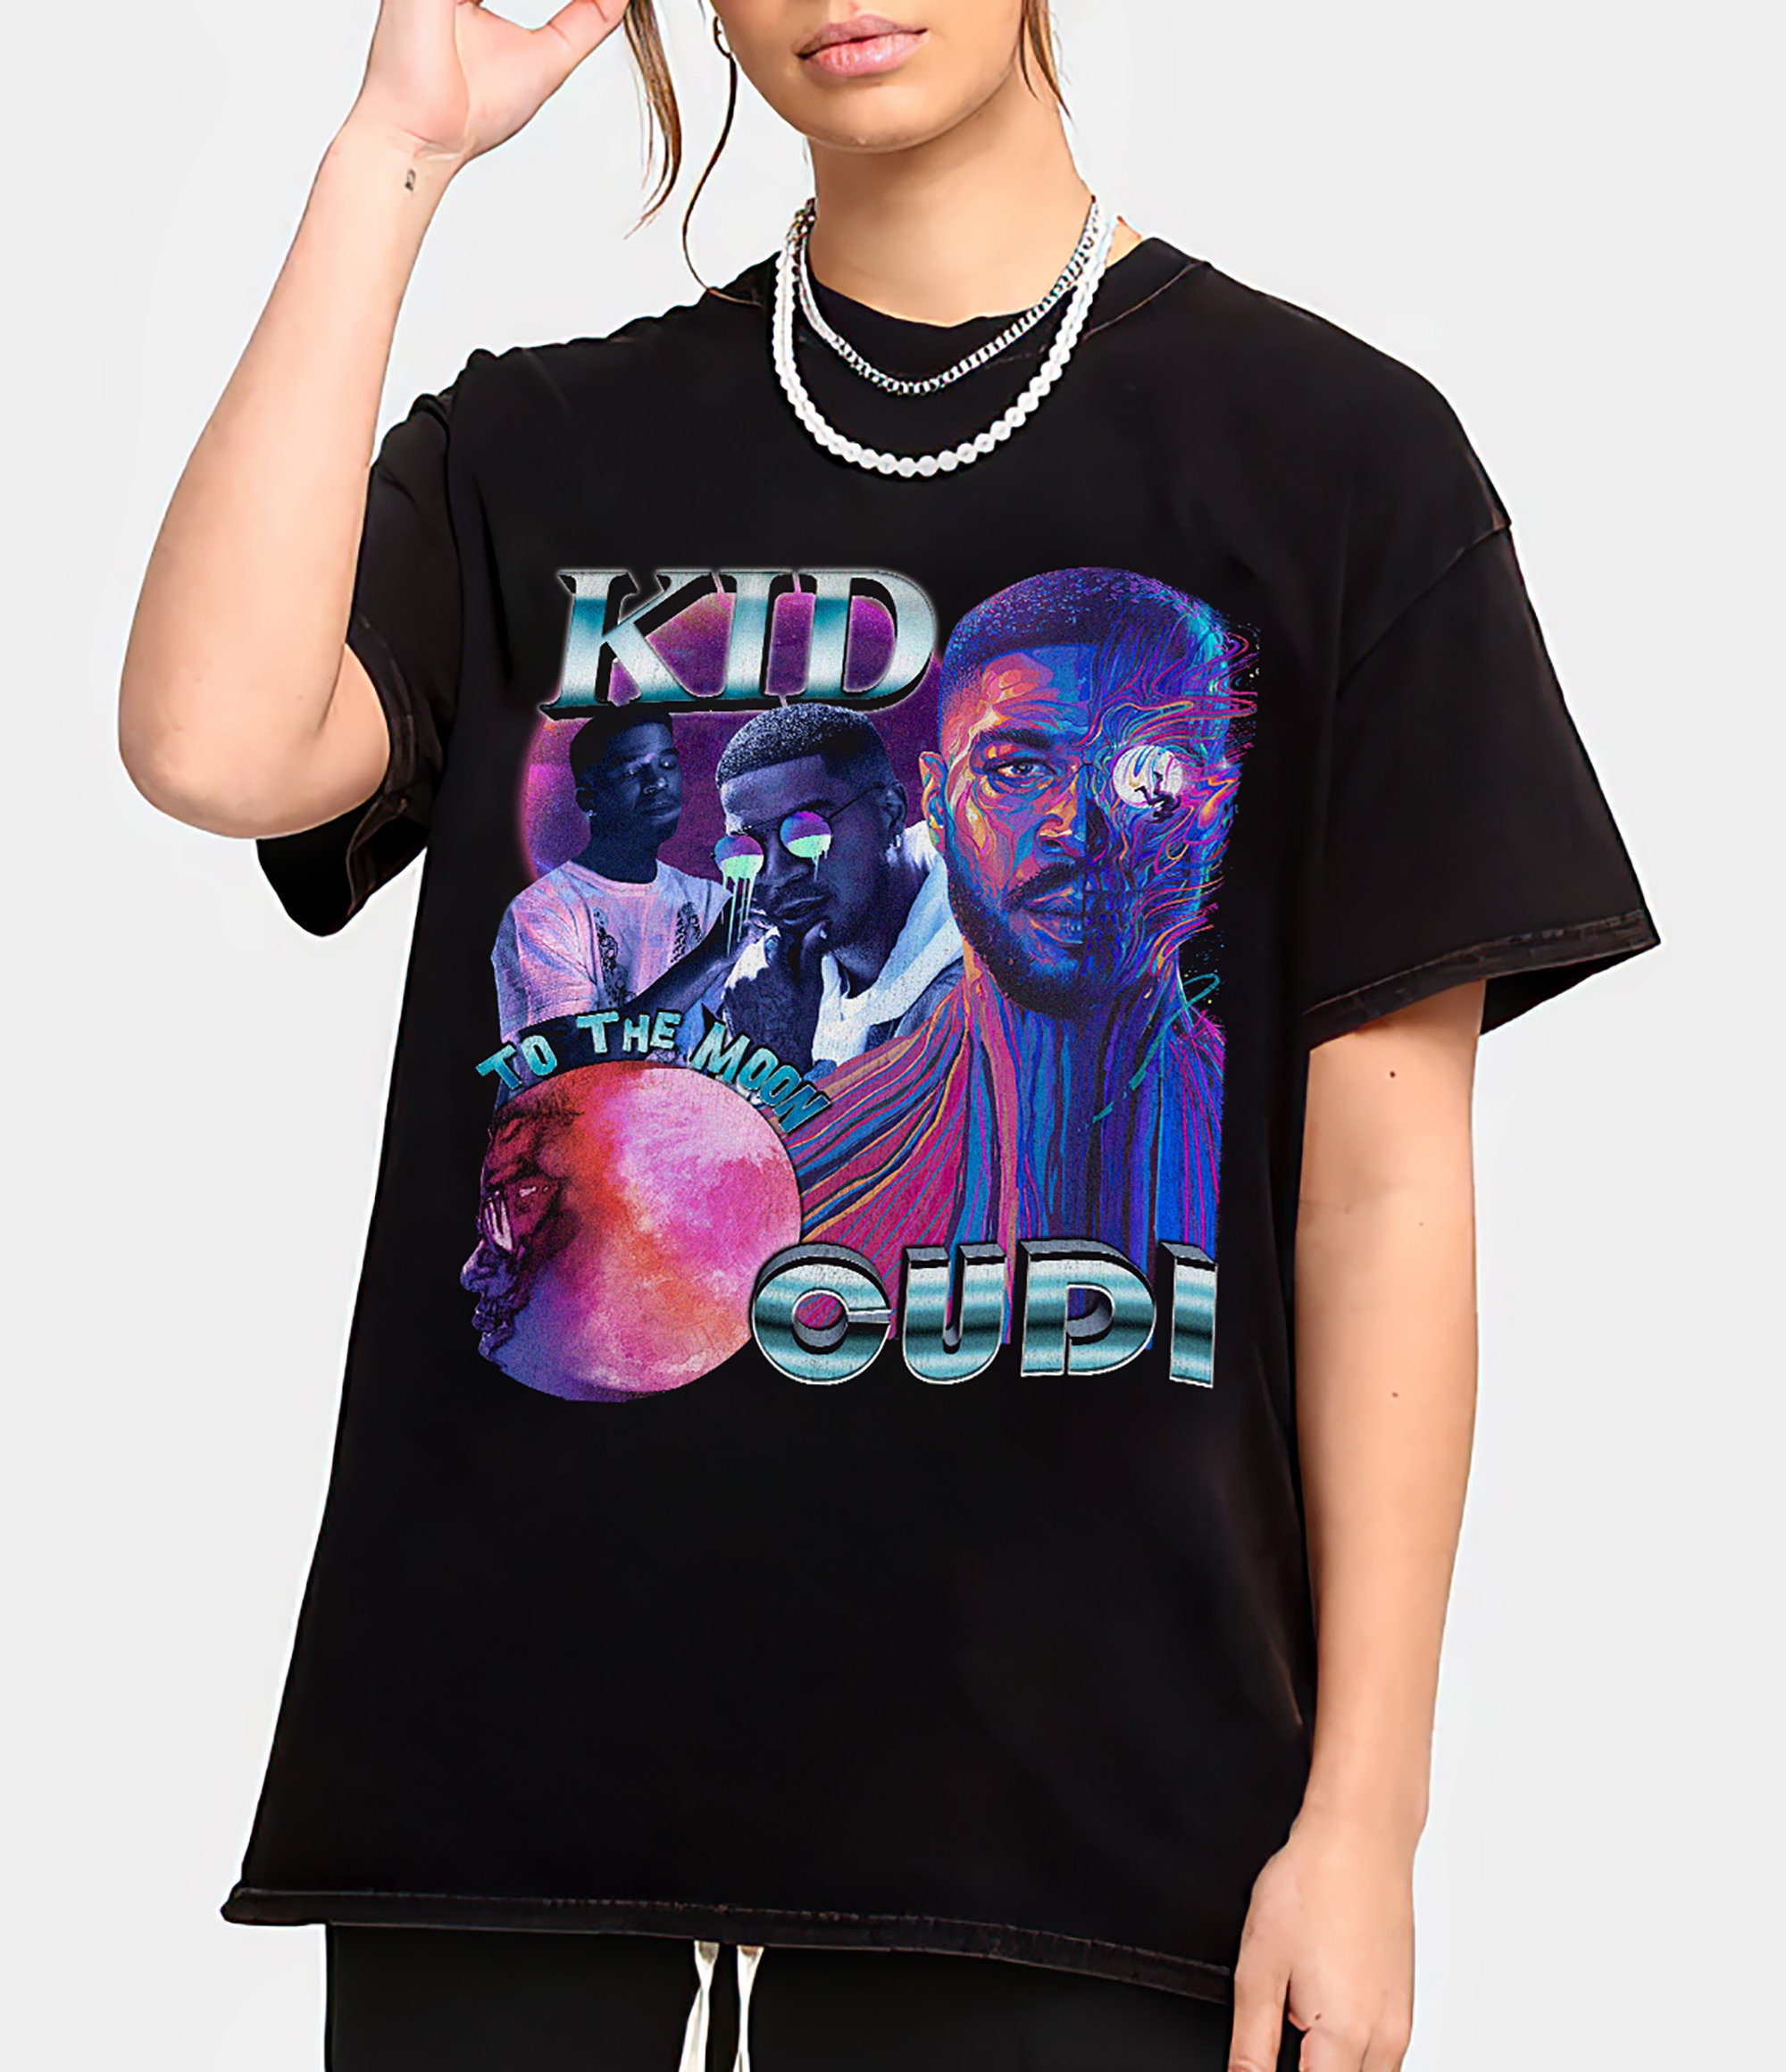 To The Moon Tour 2022 Kid Cudi Graphic Unisex T-Shirt